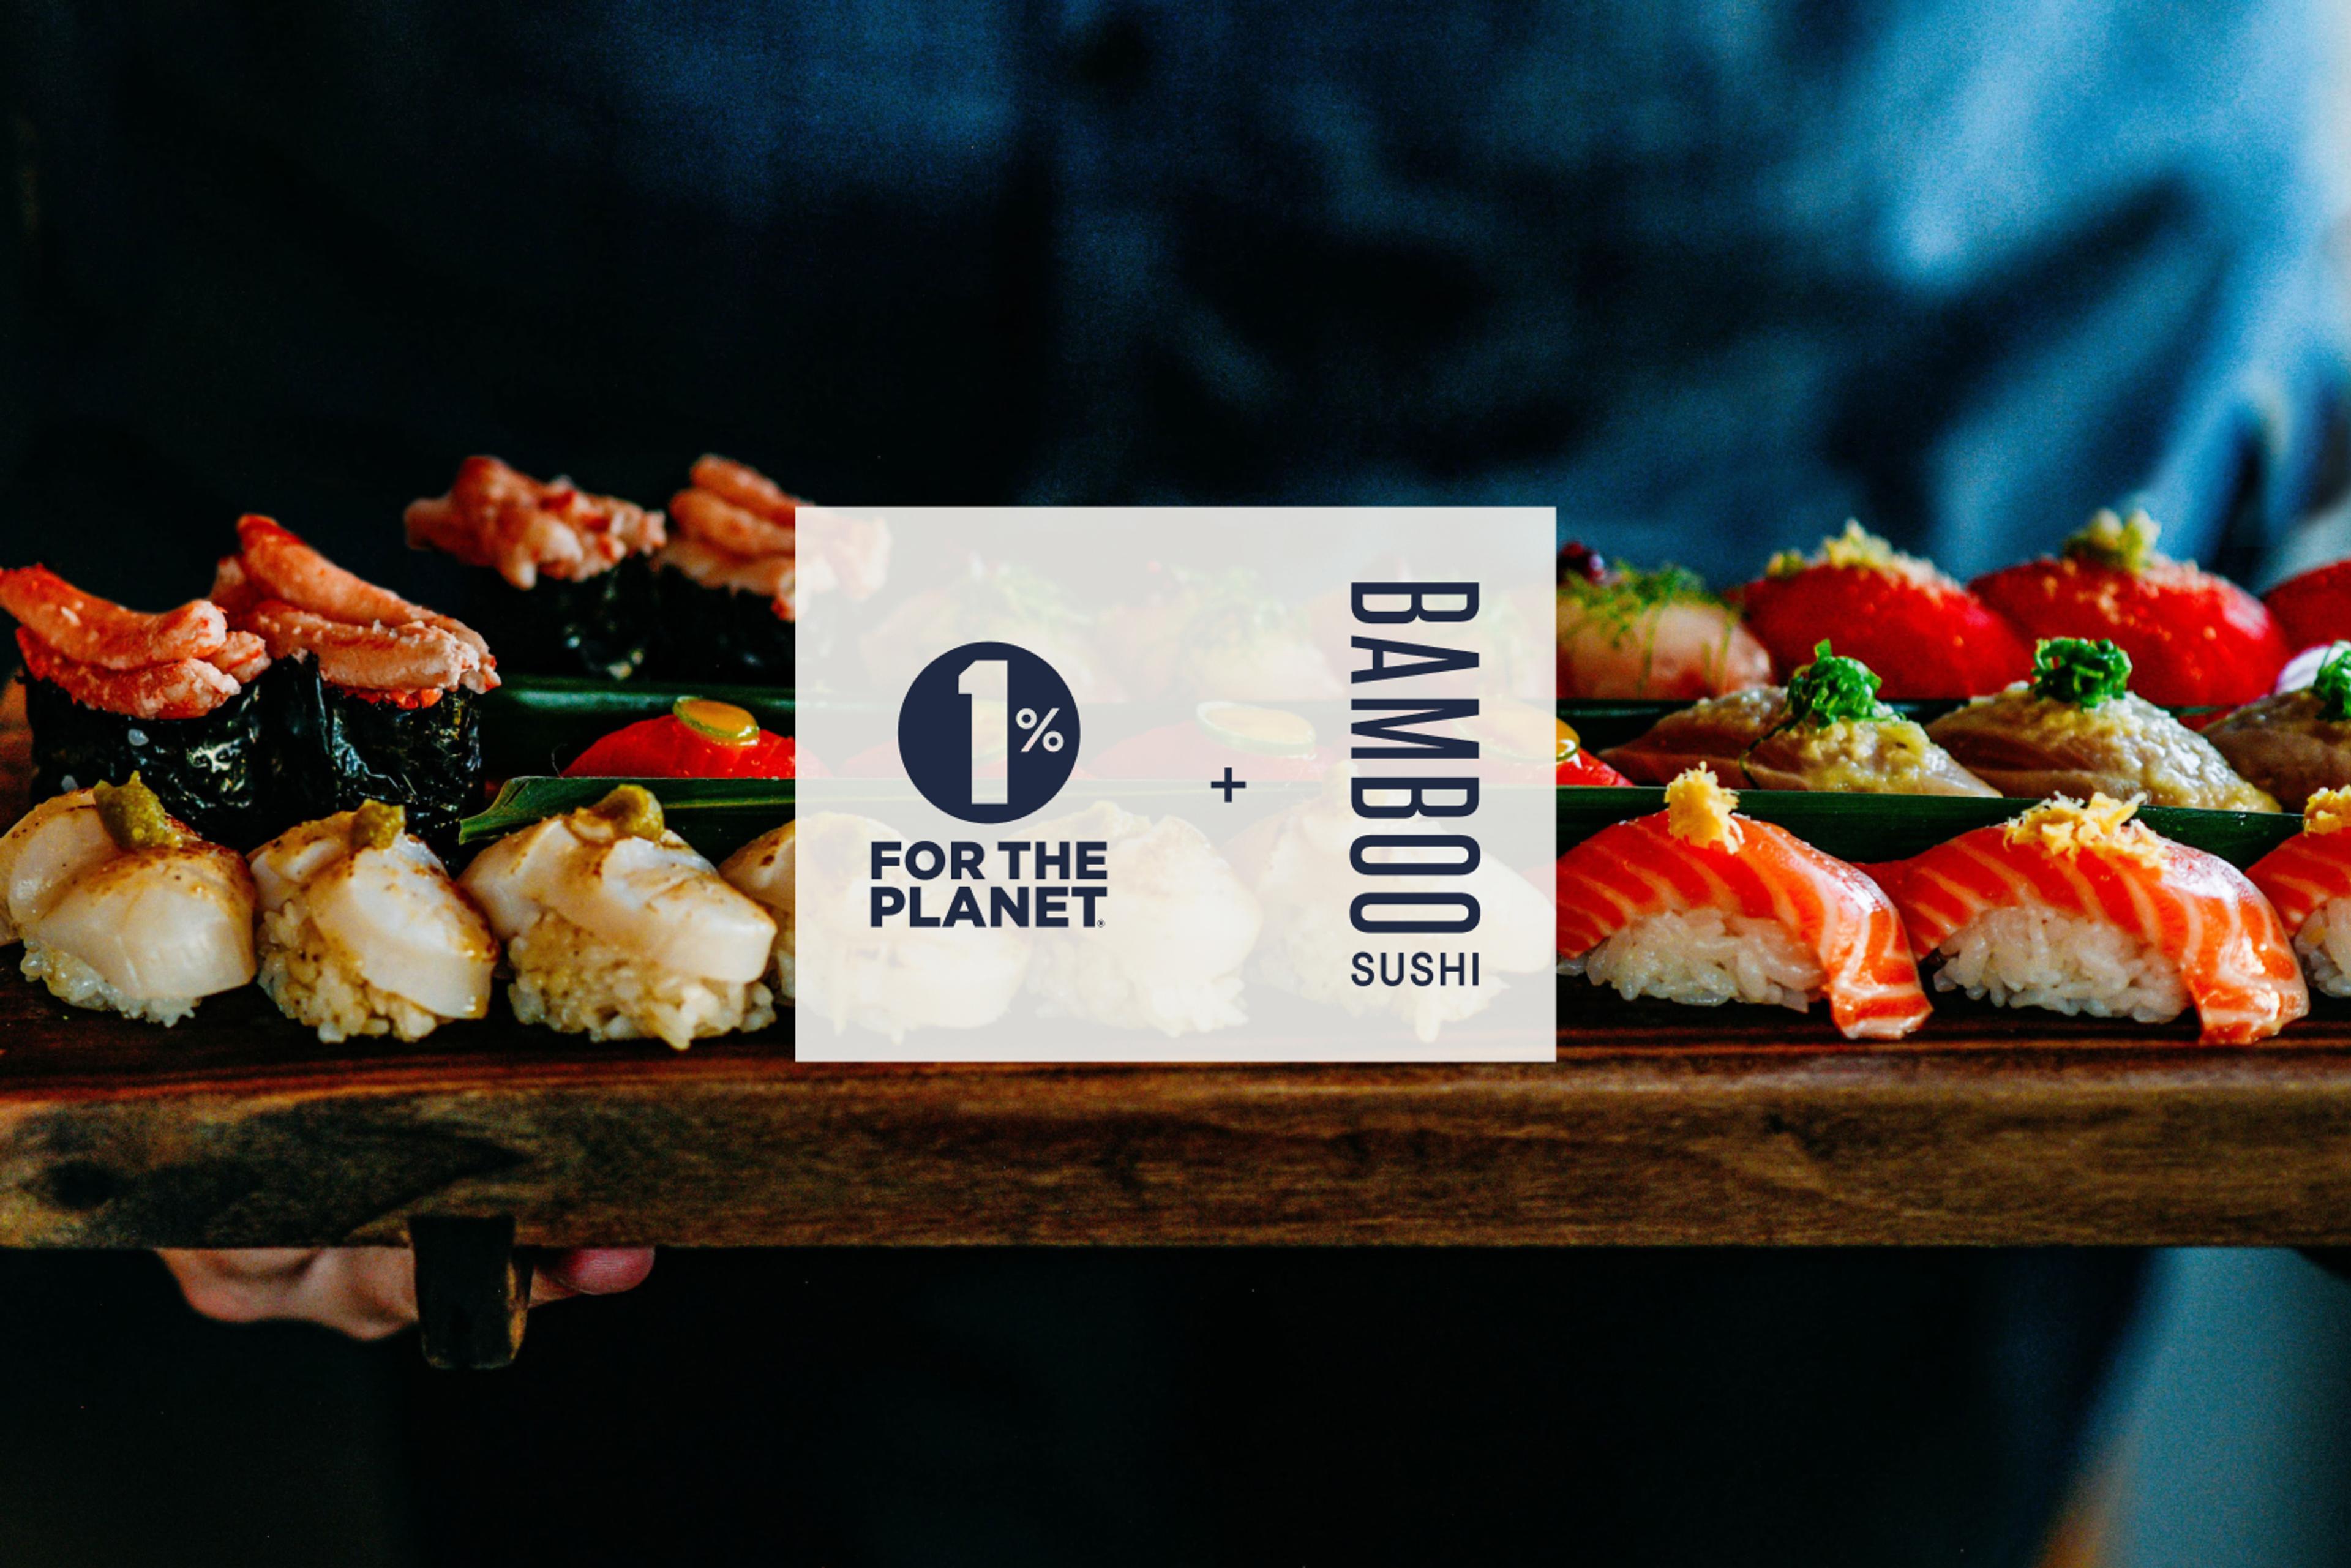 An array of sushi on a wood board with a "1% For The Plant + Bamboo Sushi" graphic superimposed on top.